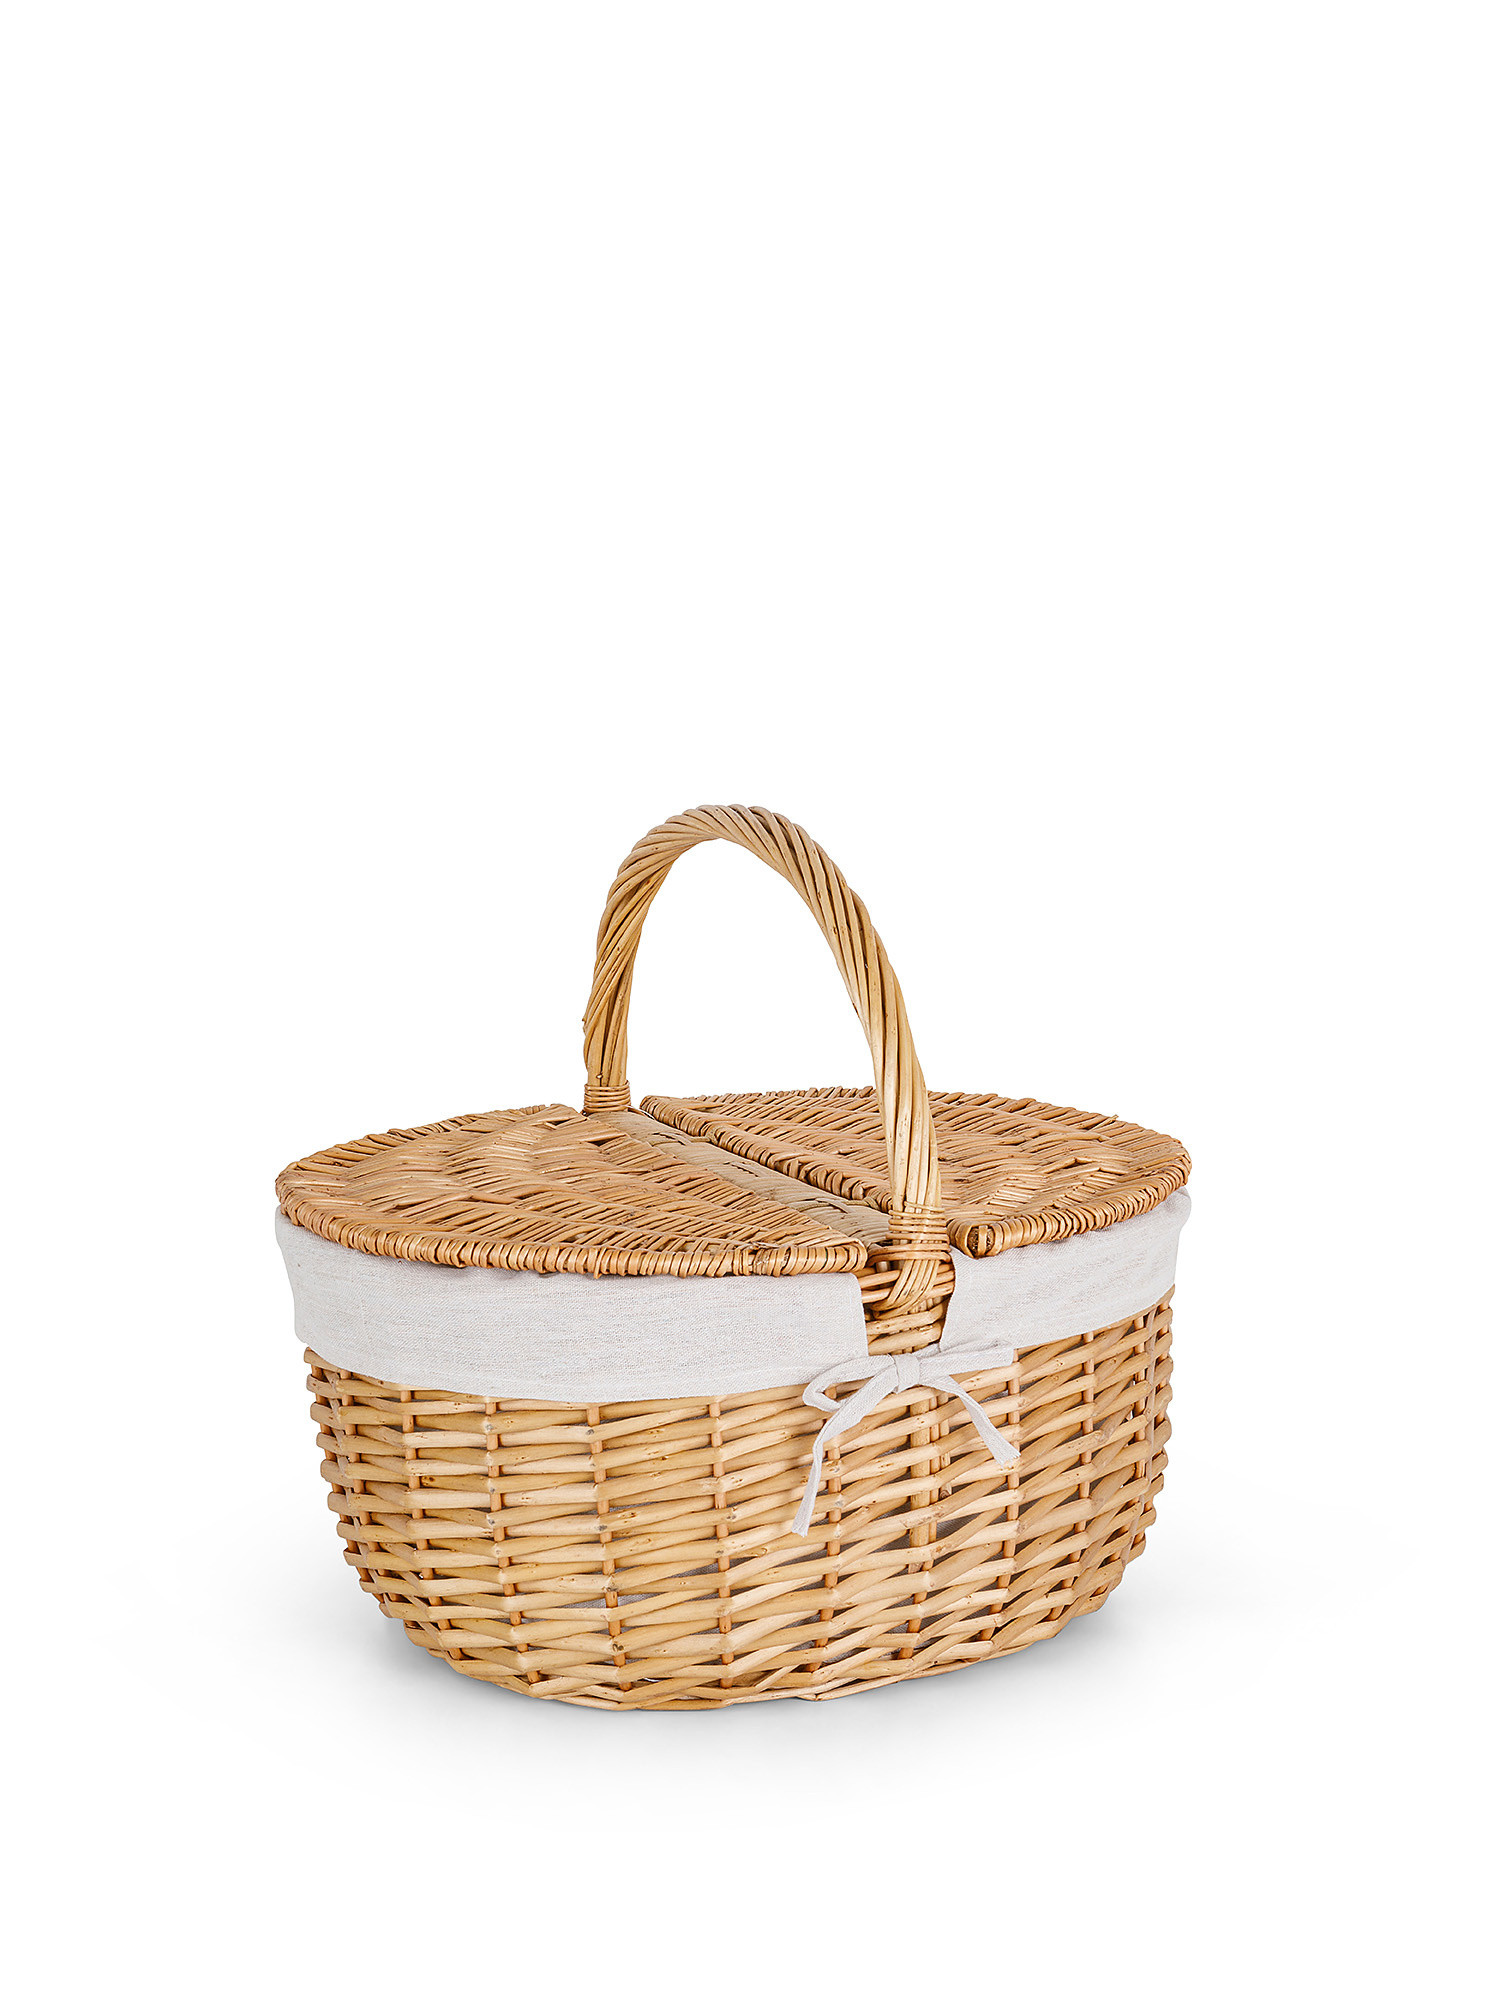 Picnic basket with lining, Natural, large image number 0